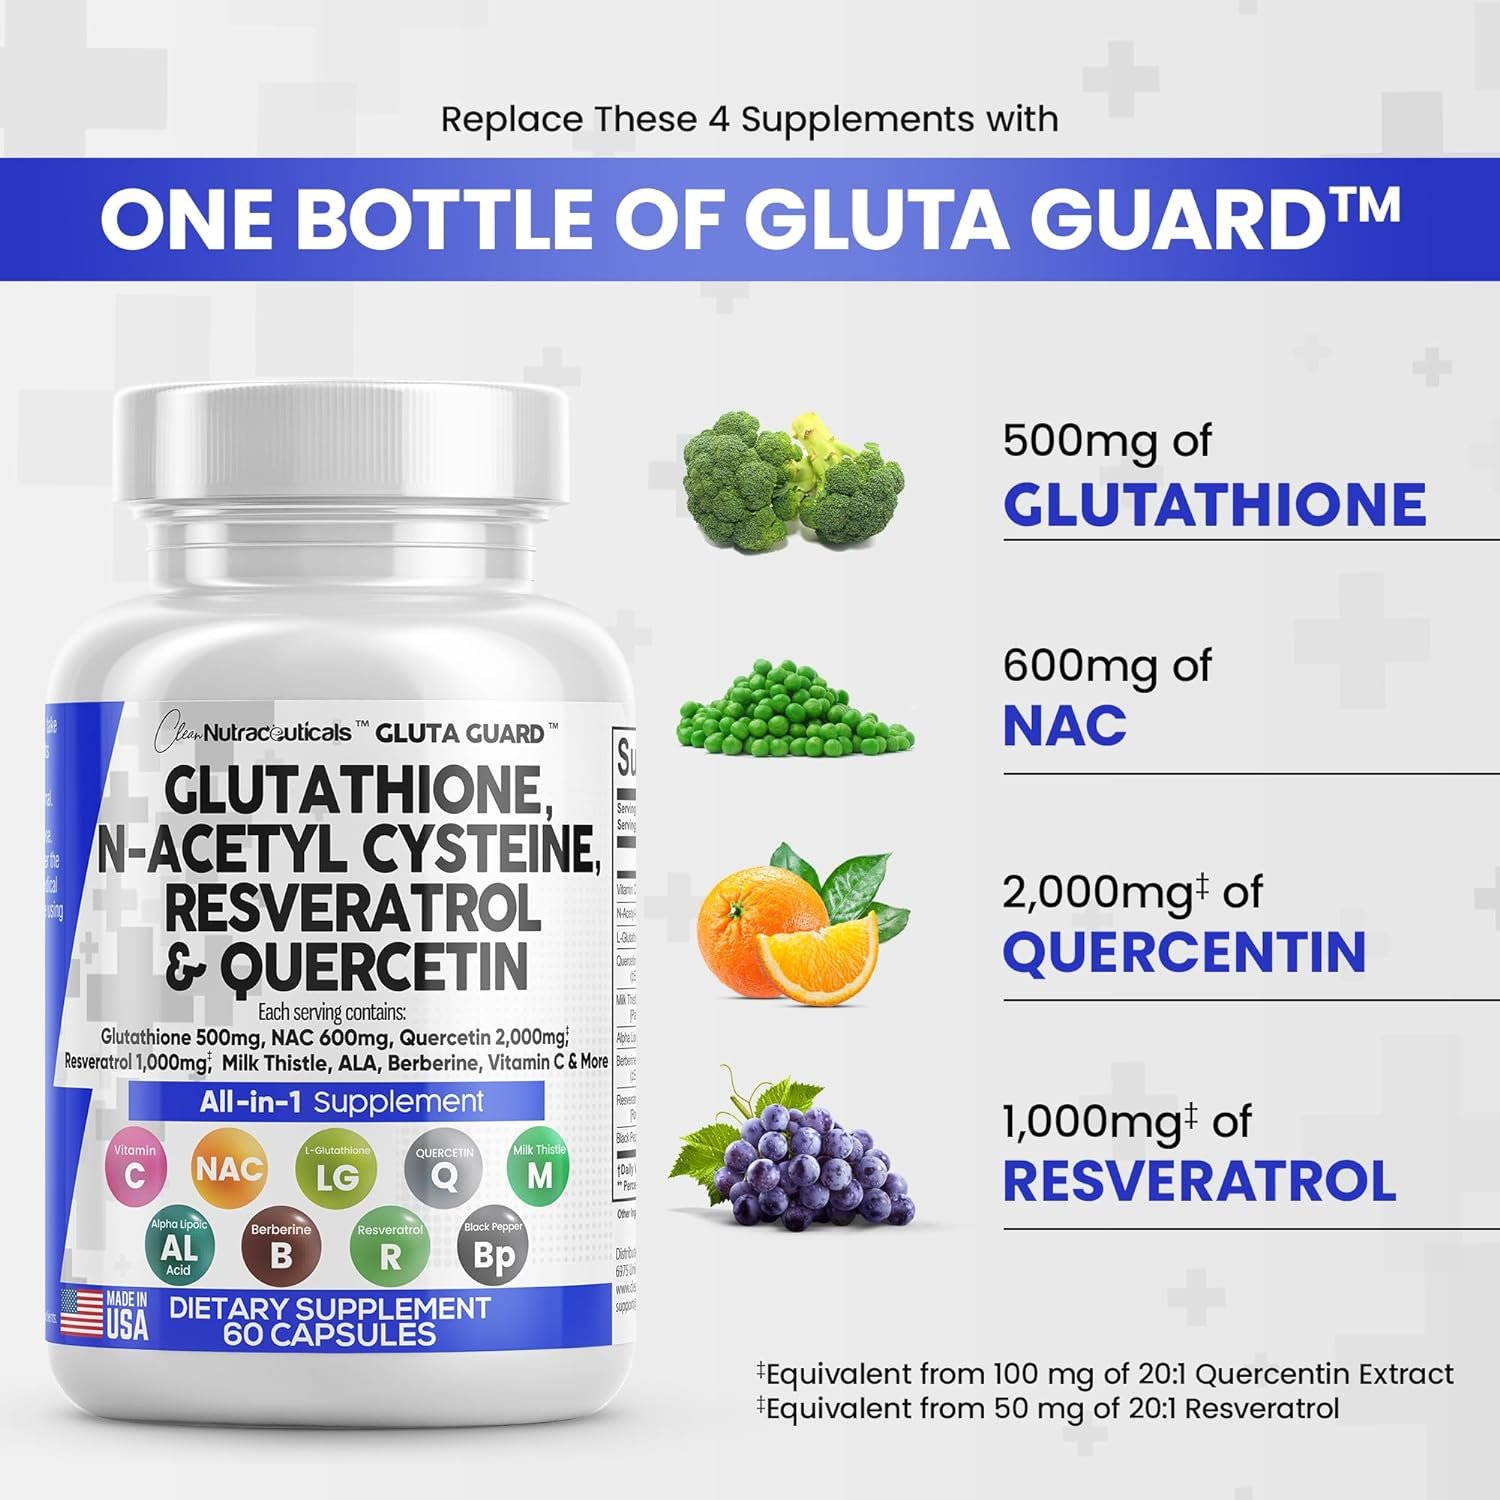 Clean Nutraceuticals Glutathione 500mg Supplement Review